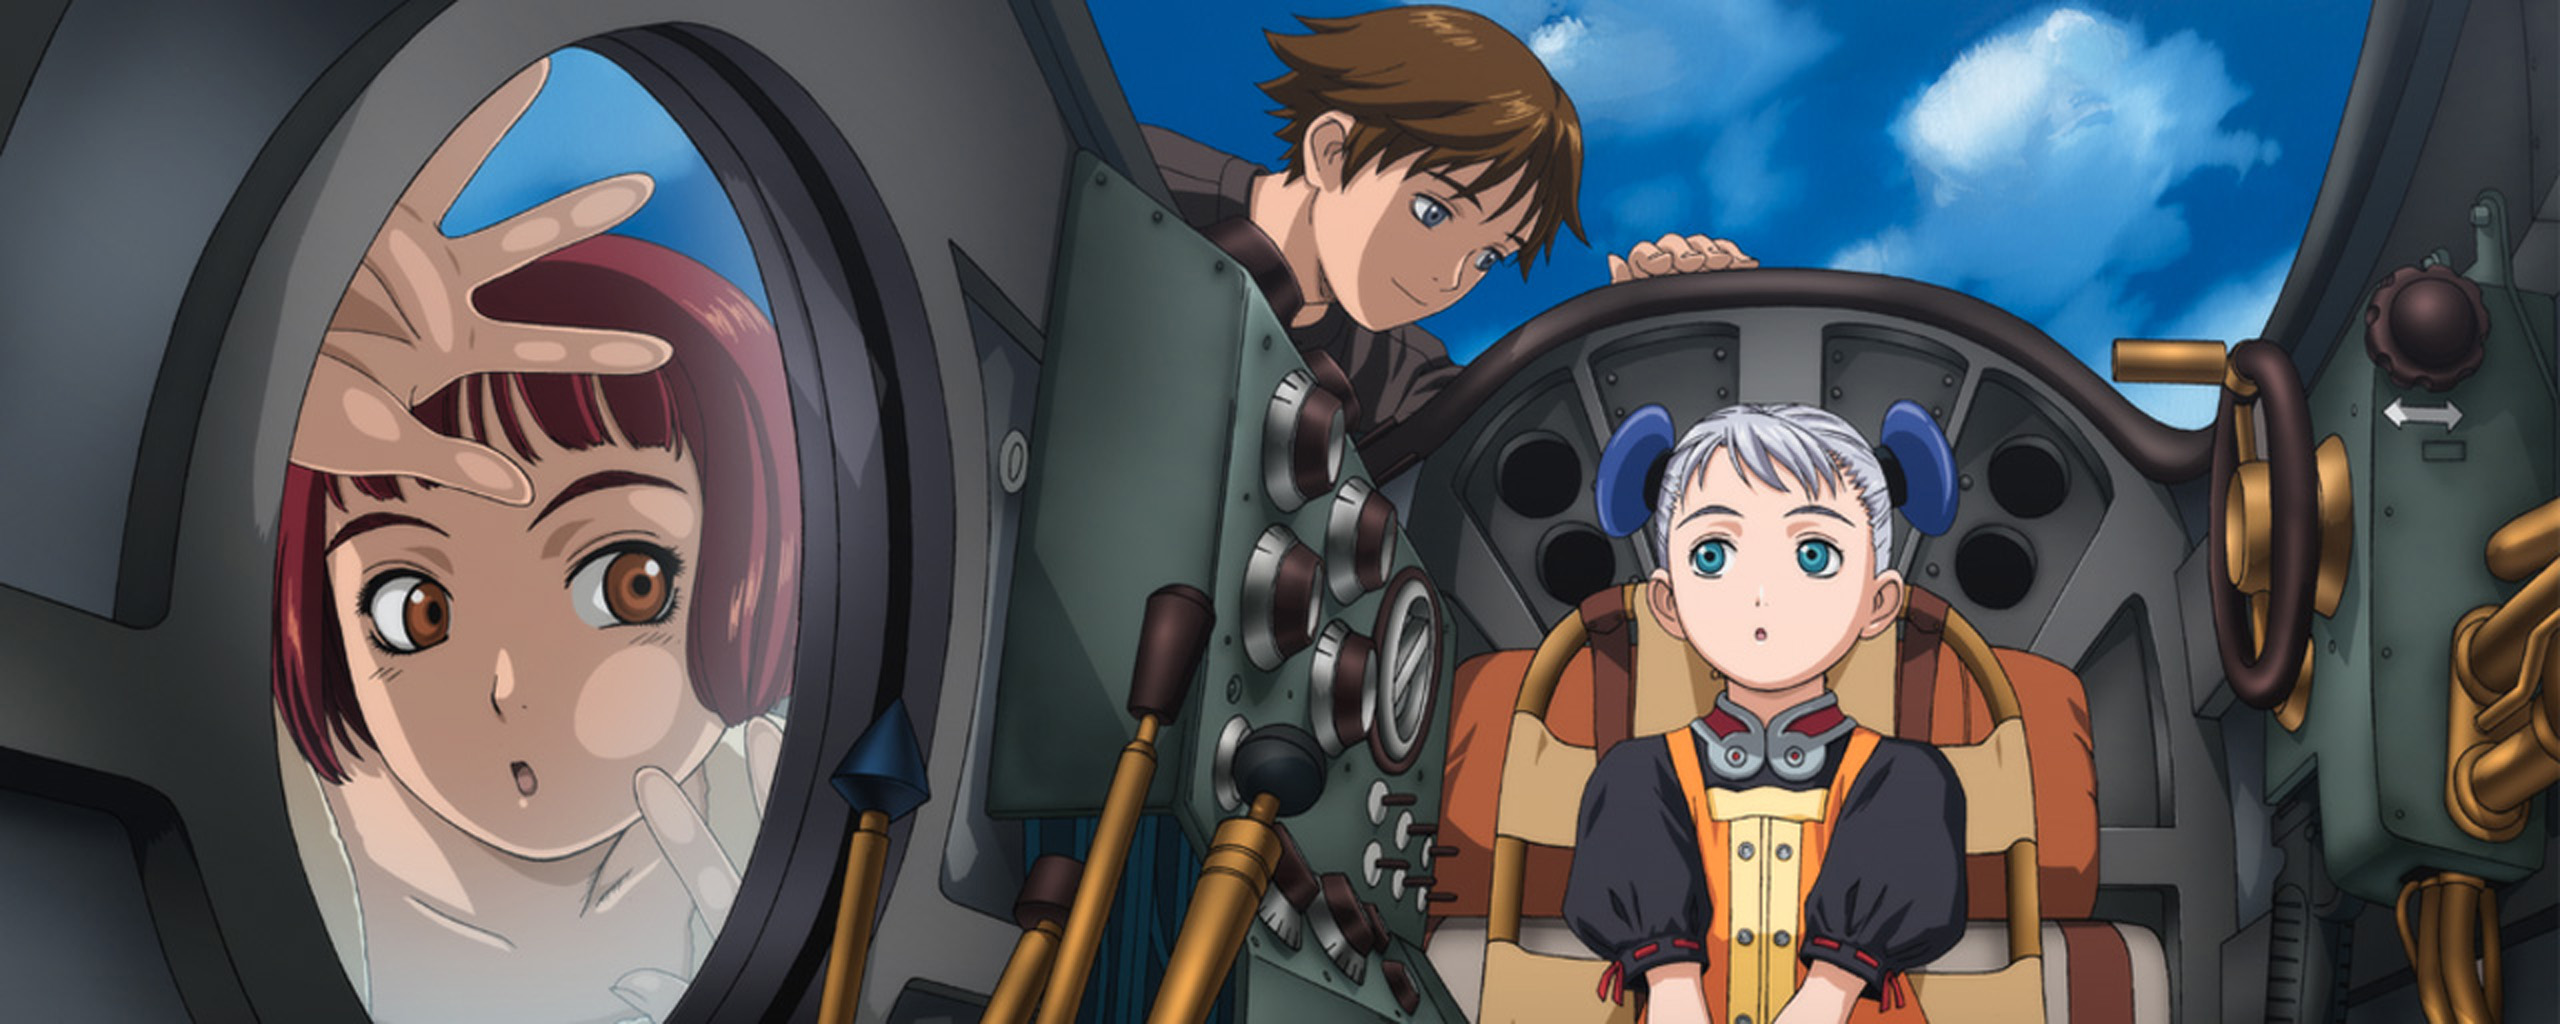 Last Exile Fam the Silver Wing  17  AstroNerdBoys Anime  Manga Blog   AstroNerdBoys Anime  Manga Blog